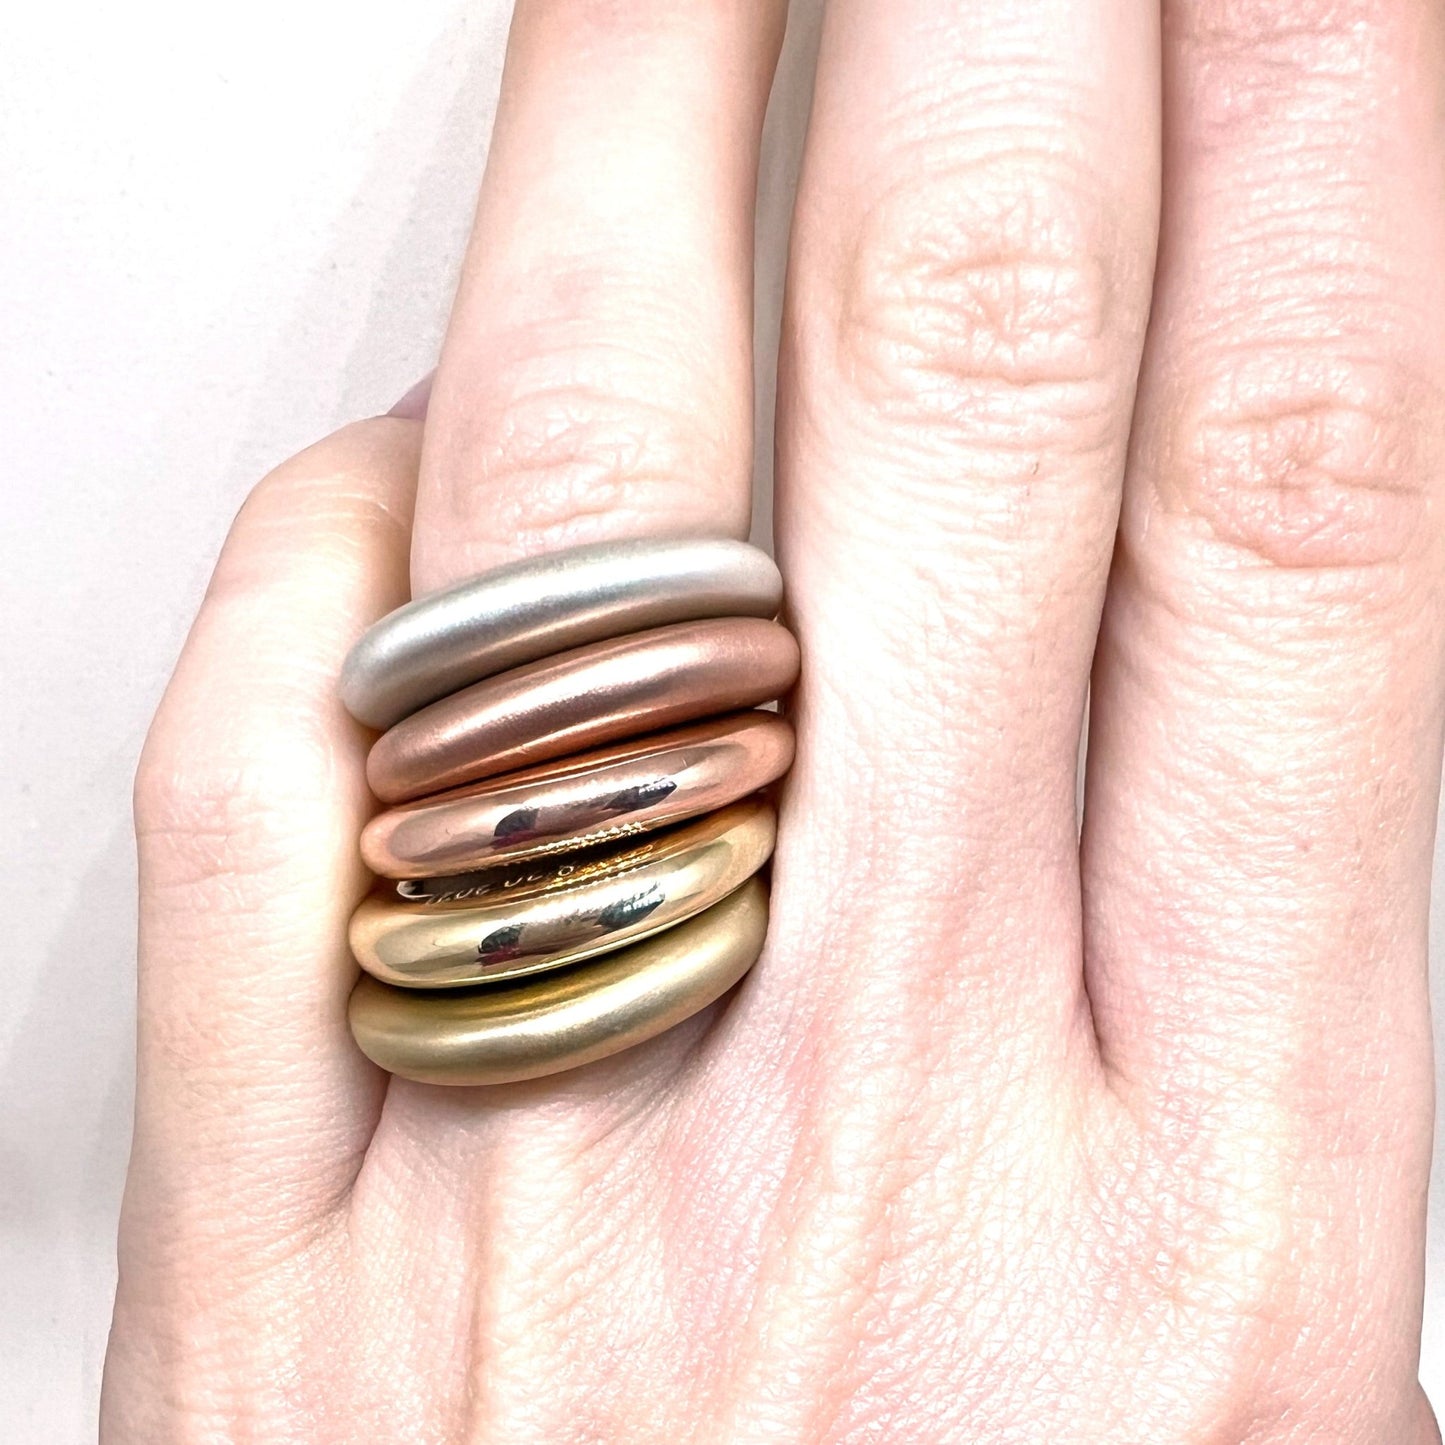 Solid Gold Dome Ring | Heavy Gold Ring